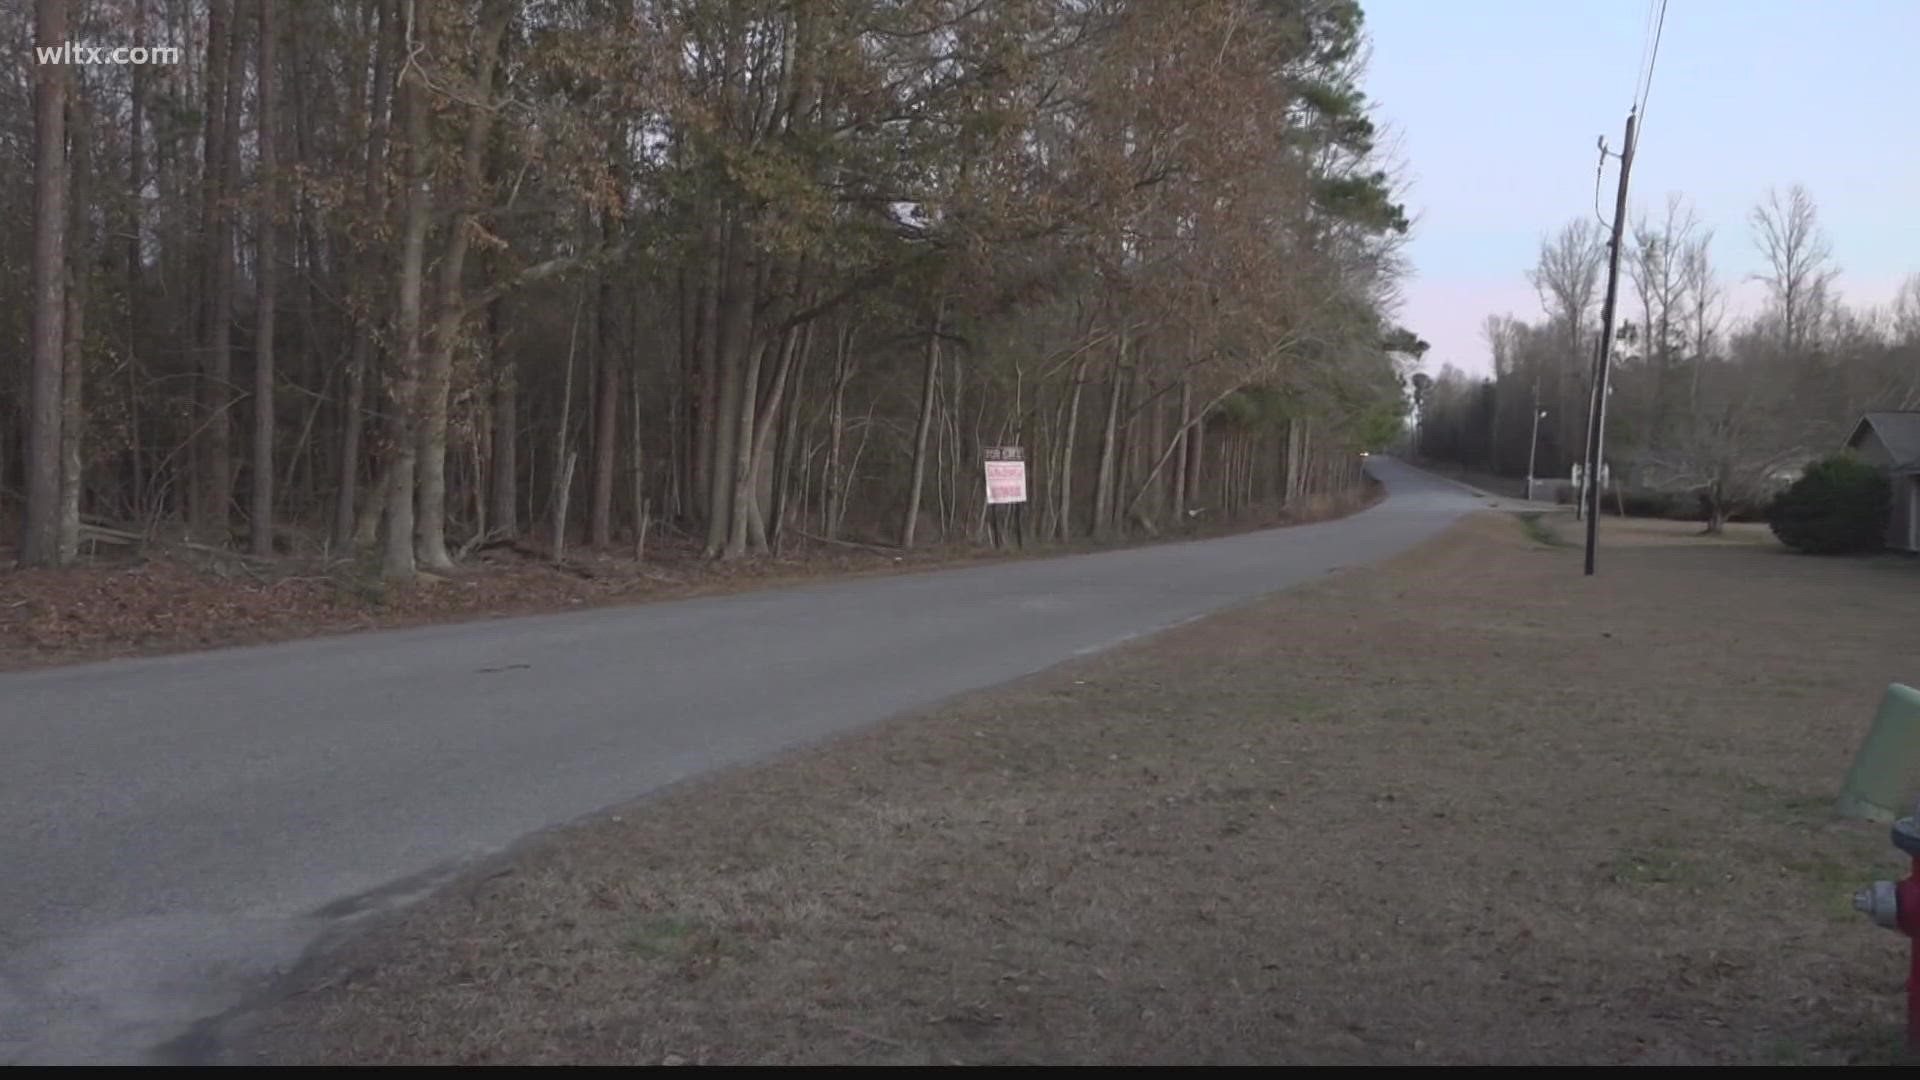 Developers want to bring over 200 homes to an area near Greenlawn Drive off Garners Ferry Road in Columbia.